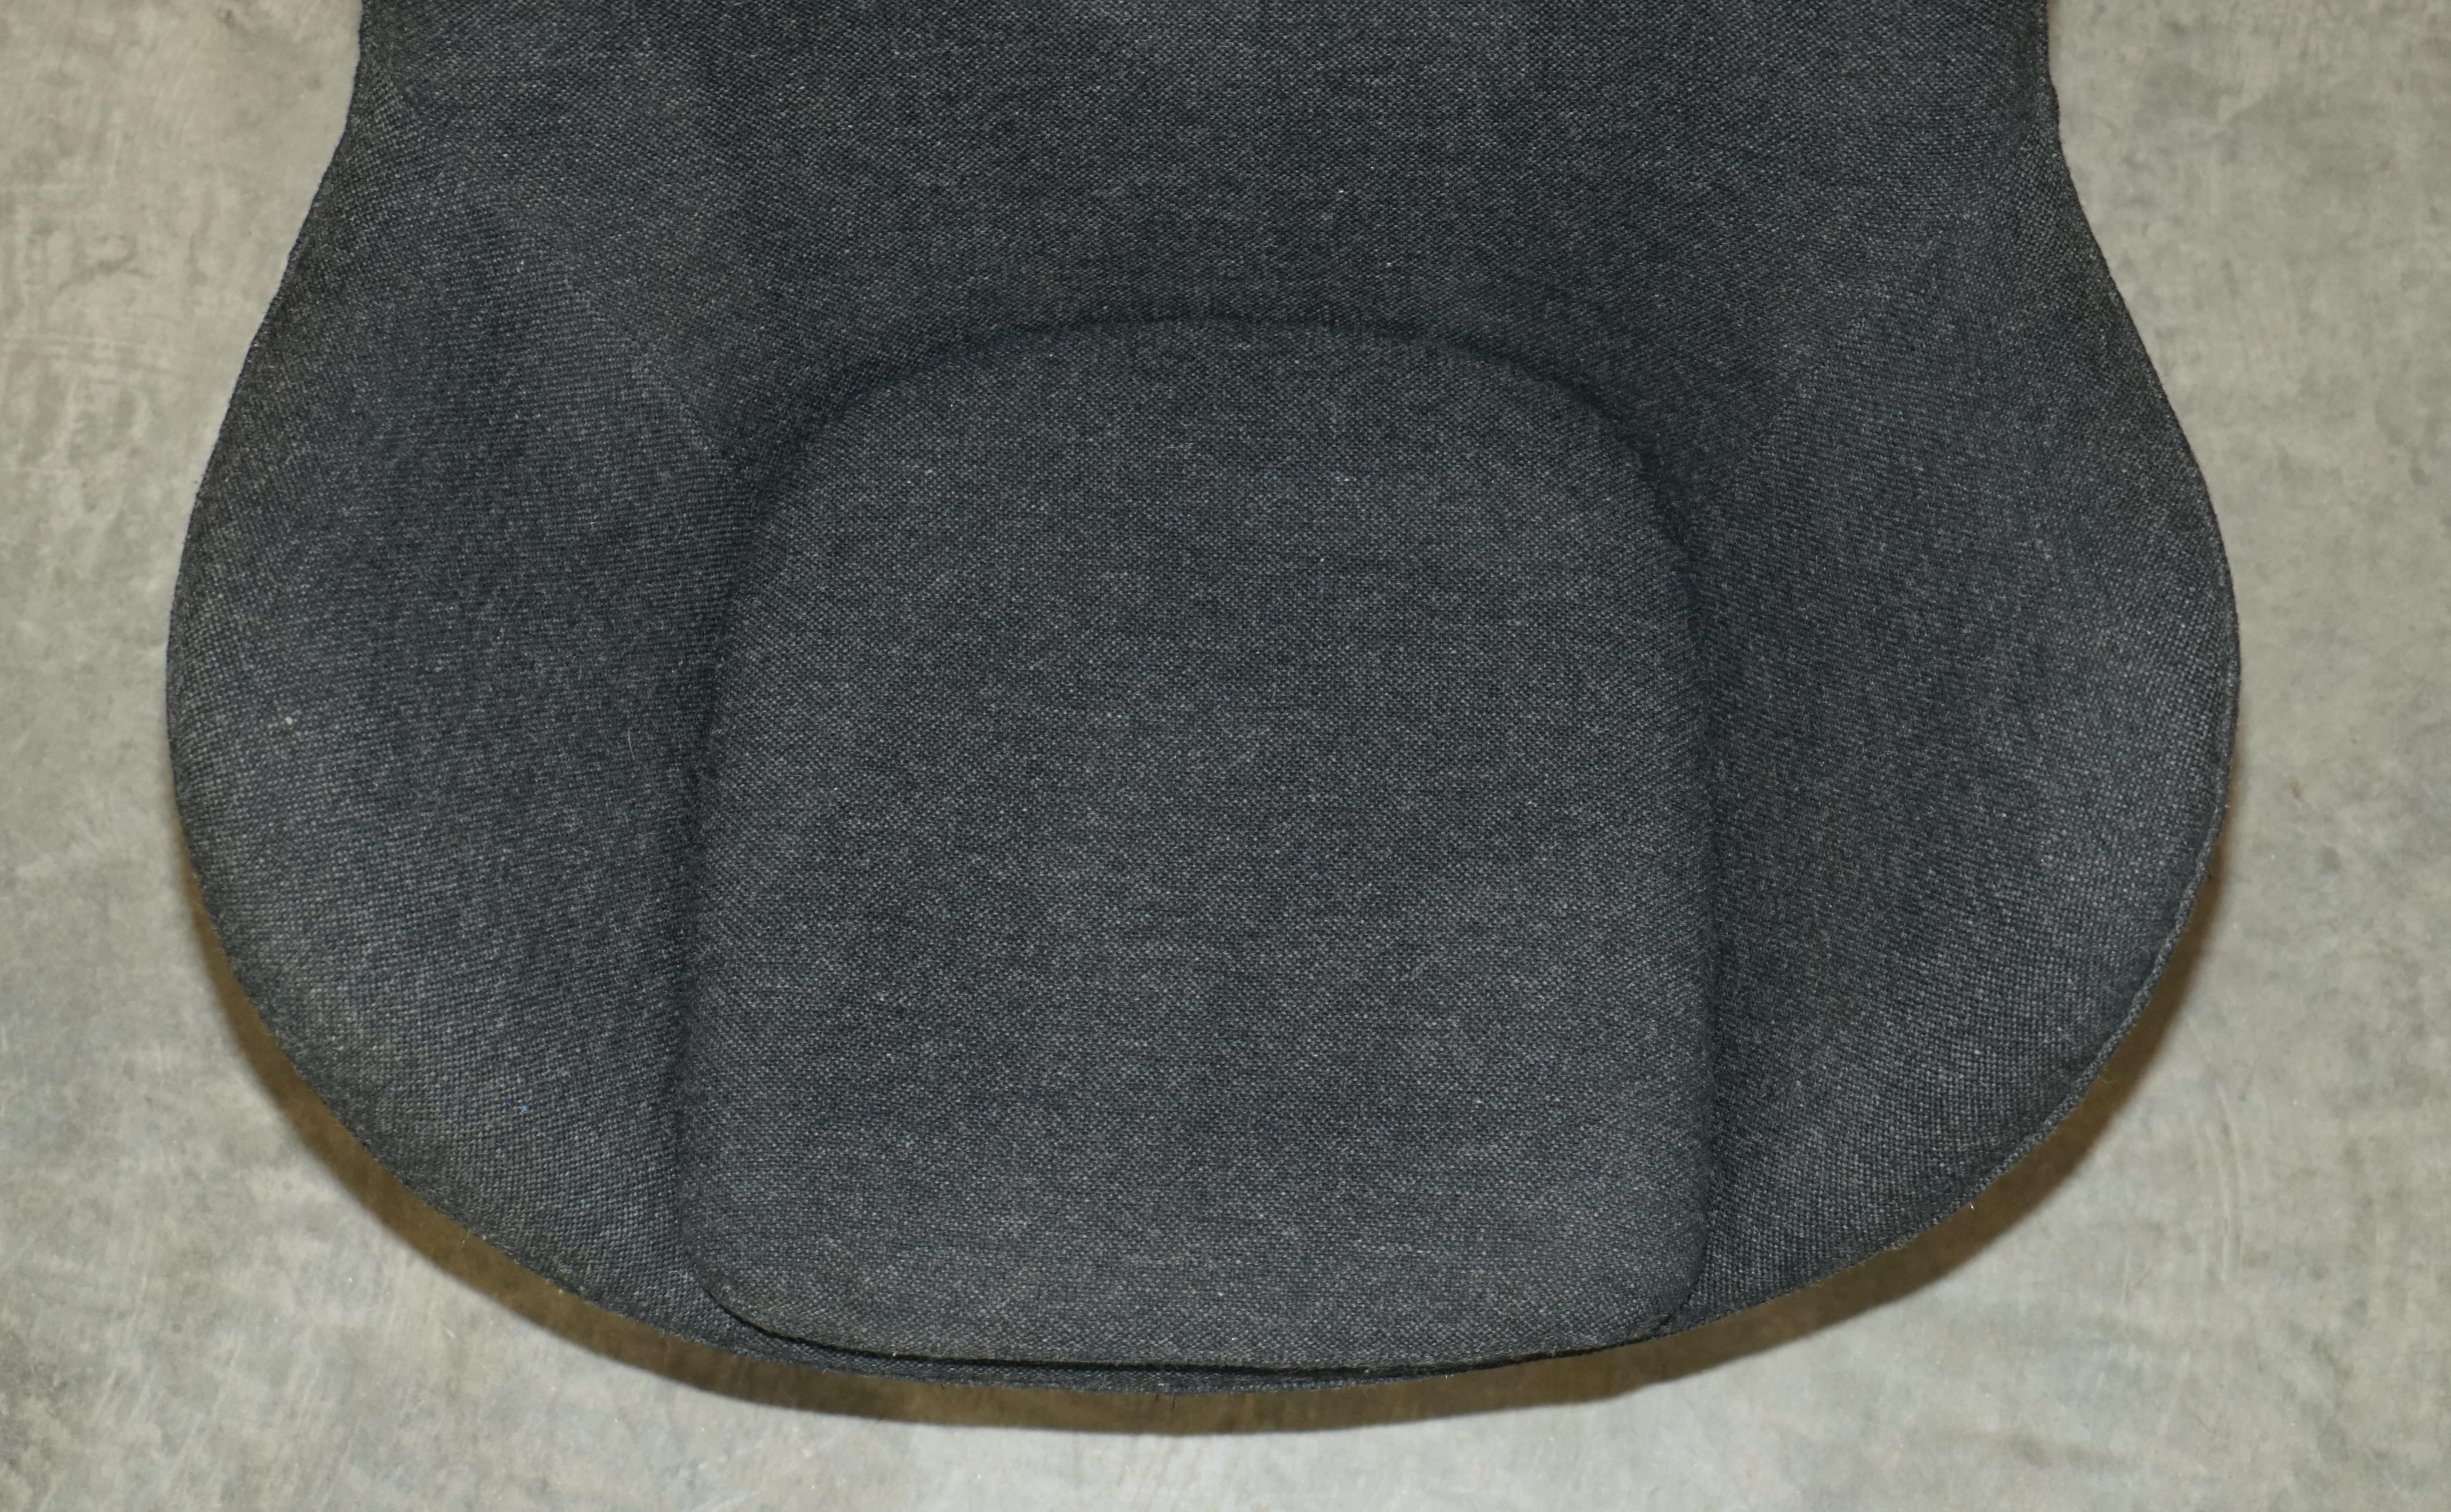 Original 1996 Stamped Fritz Hansen Egg Chair in Black / Grey Fabric For Sale 7